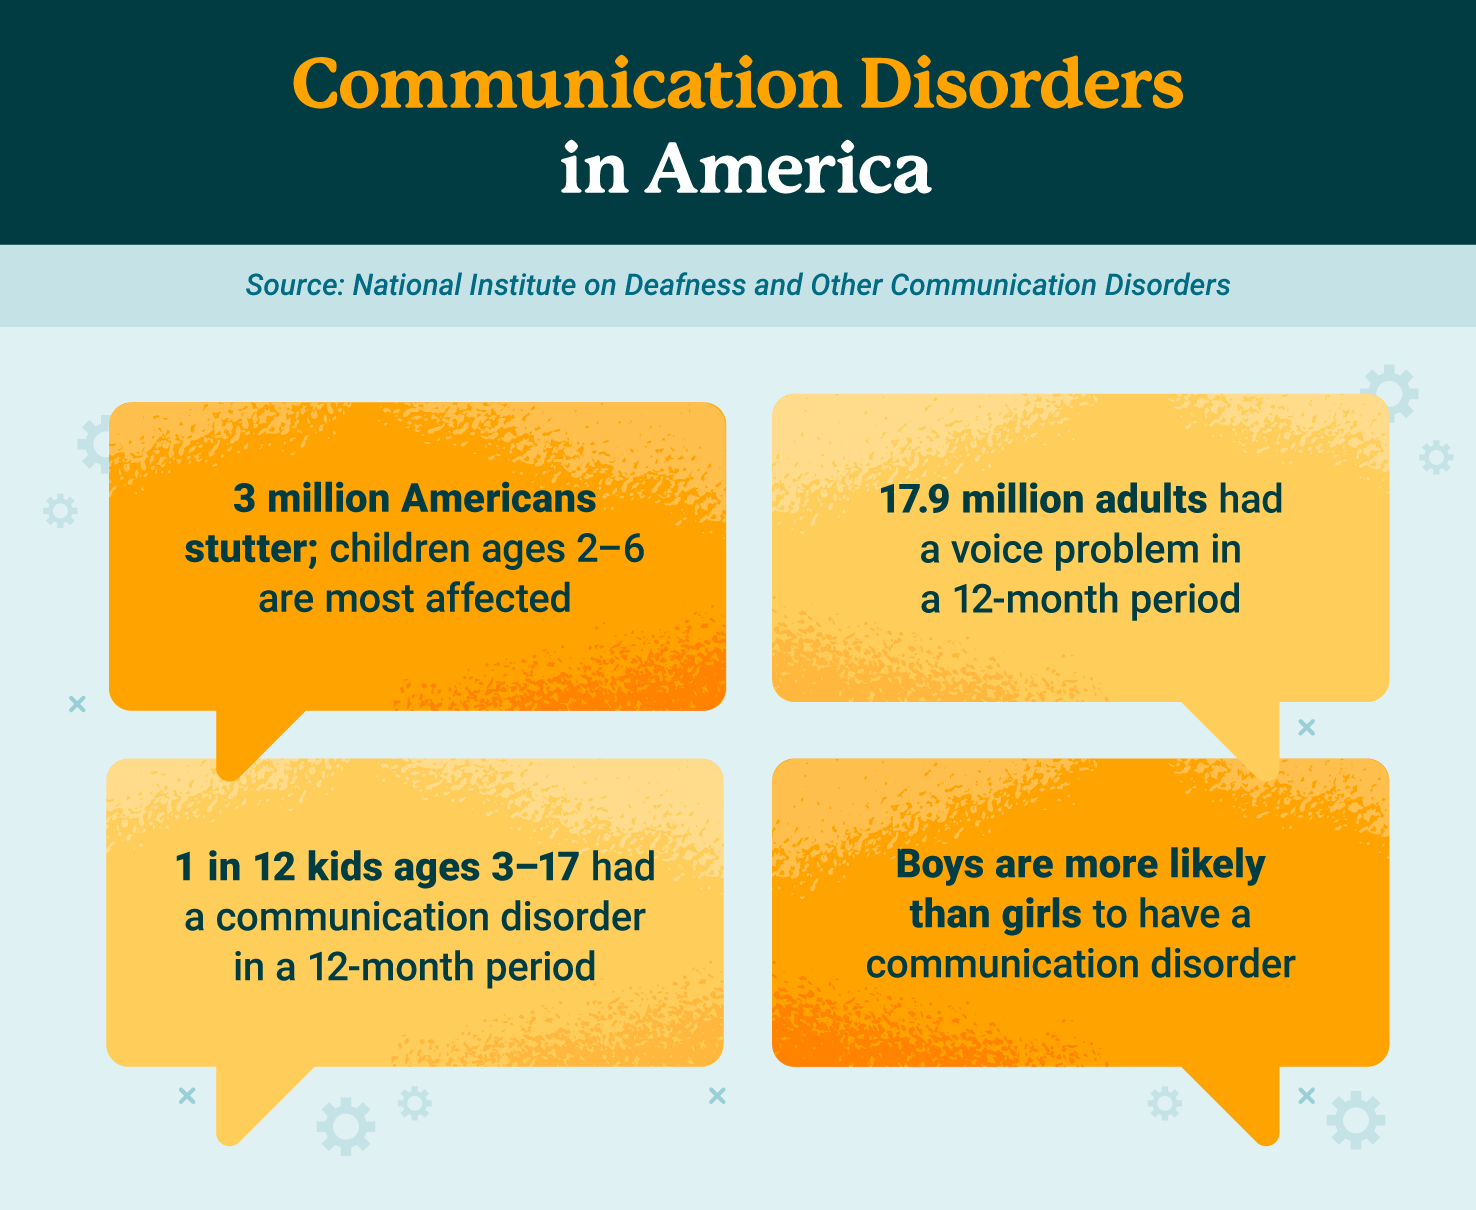 4 facts about communication disorders in America